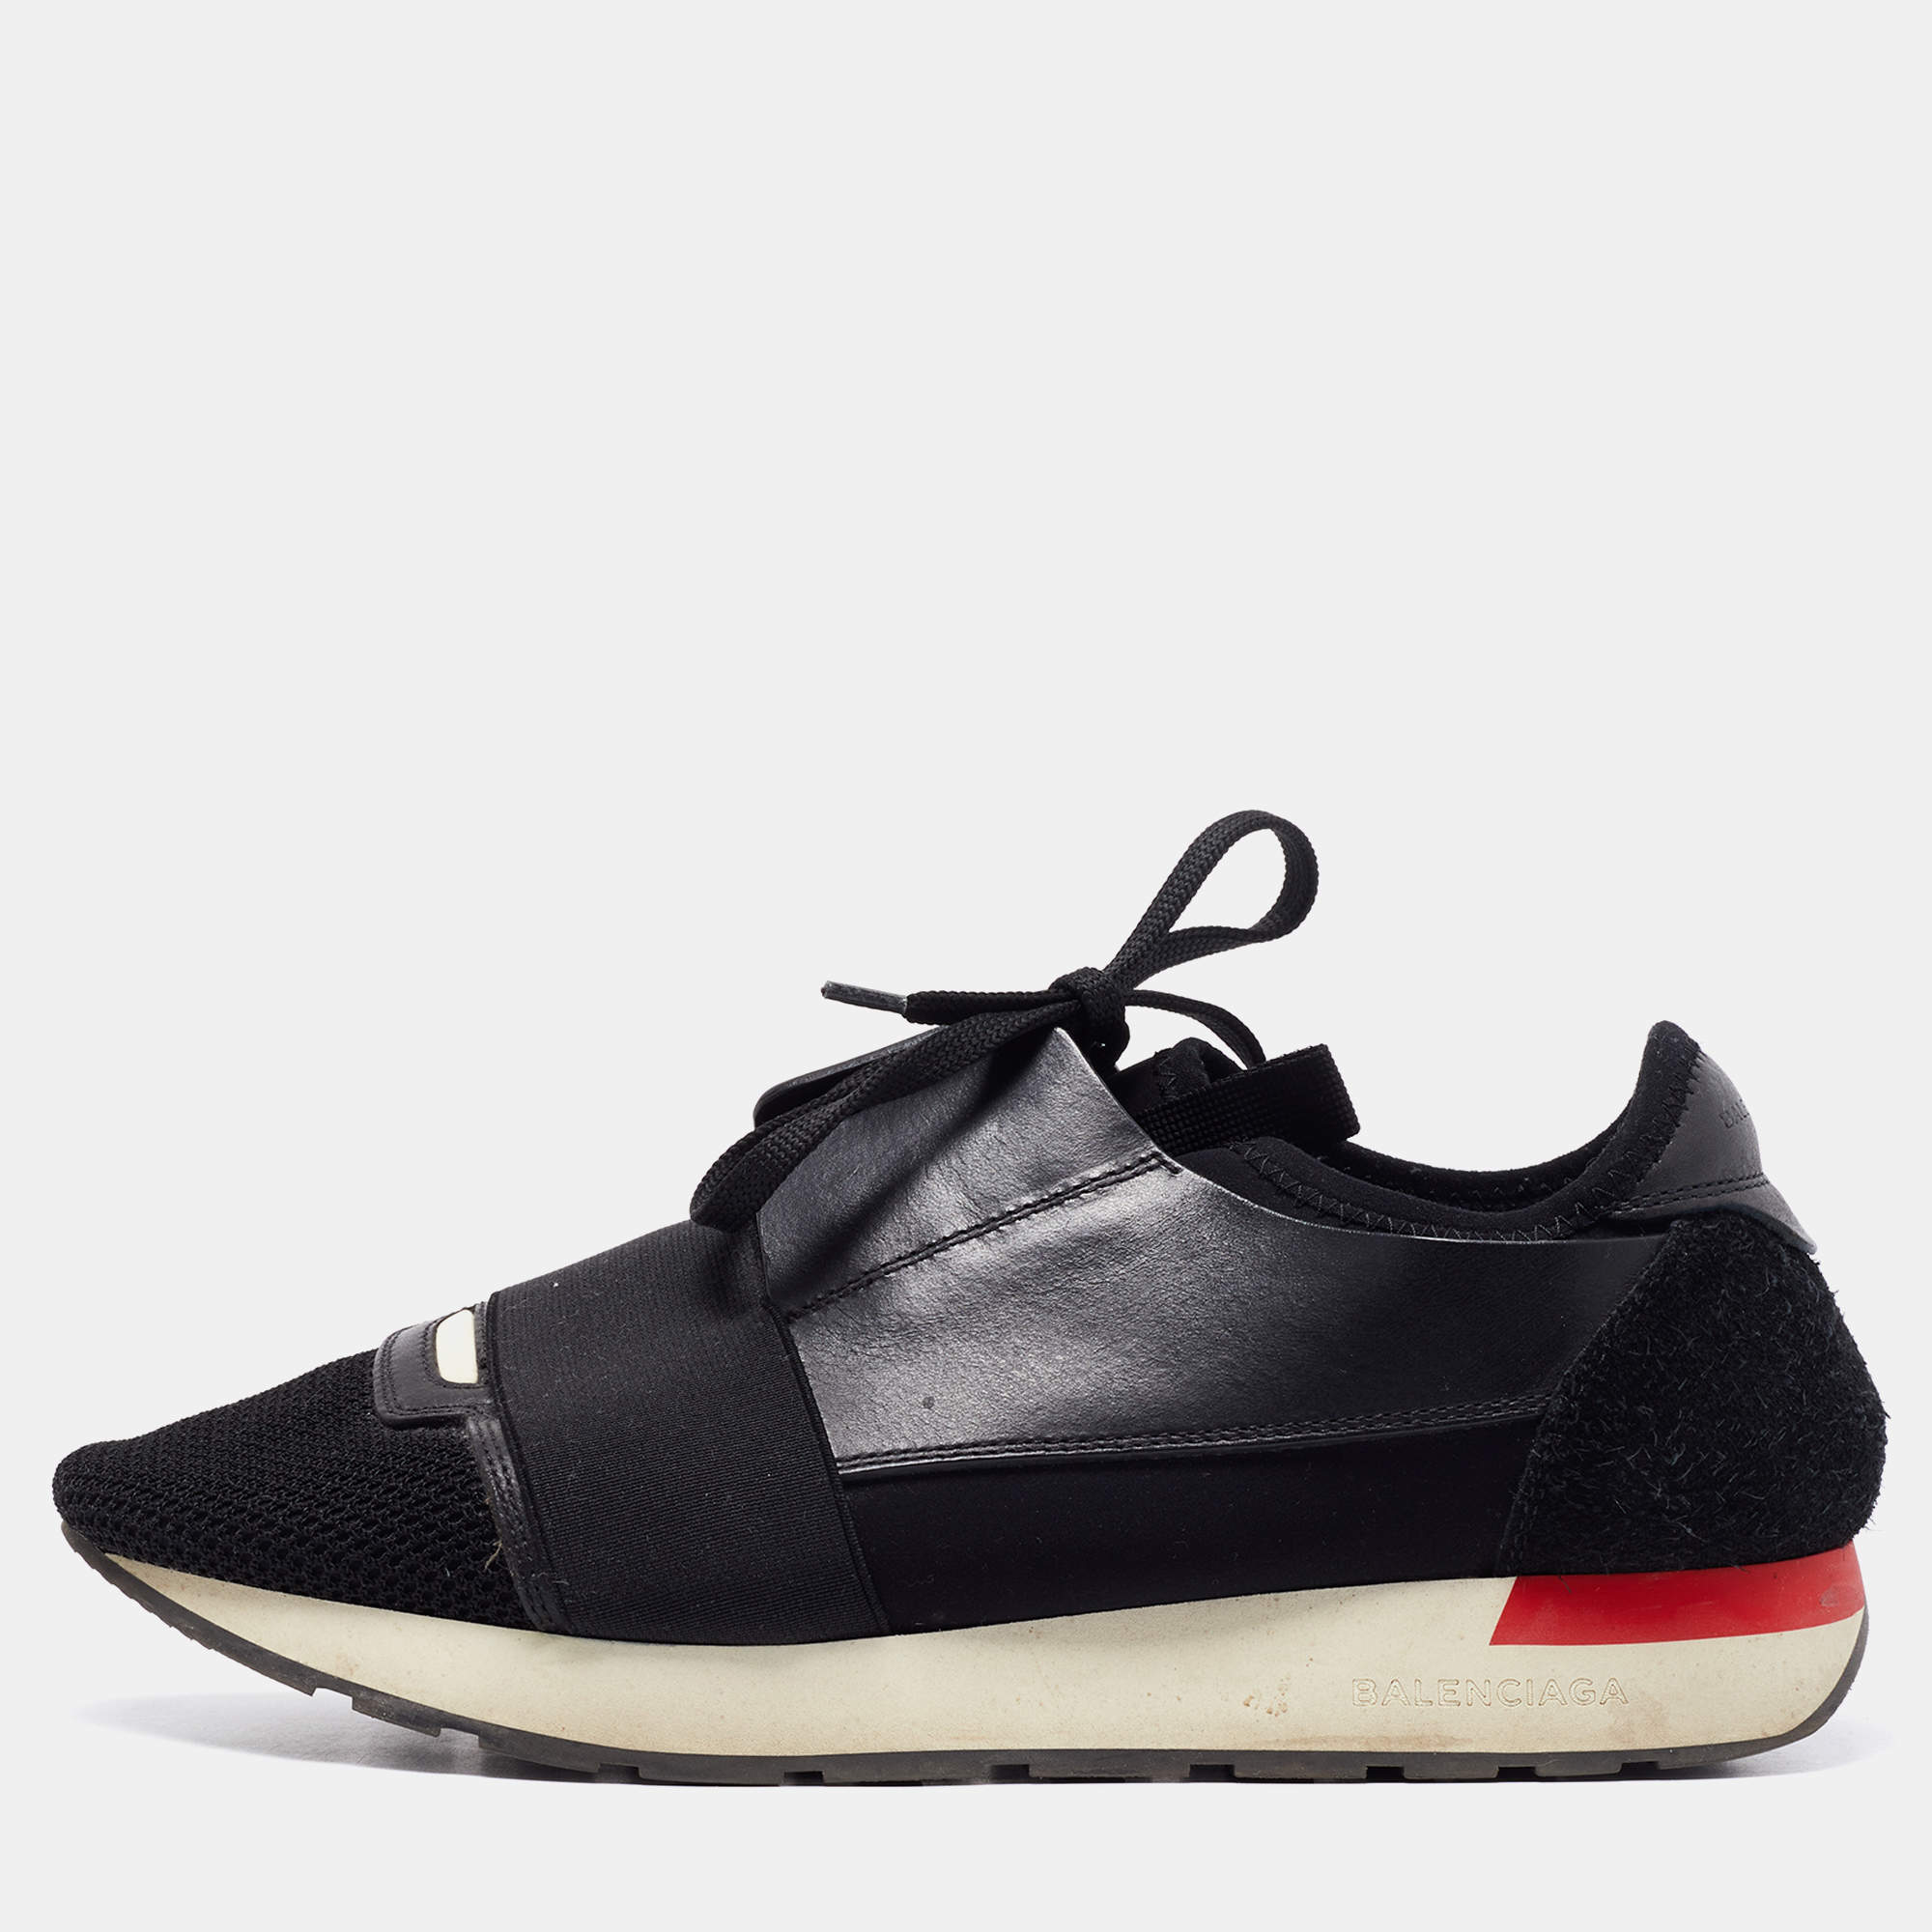 Trooper Leather Derby Shoes in Black  Balenciaga  Mytheresa